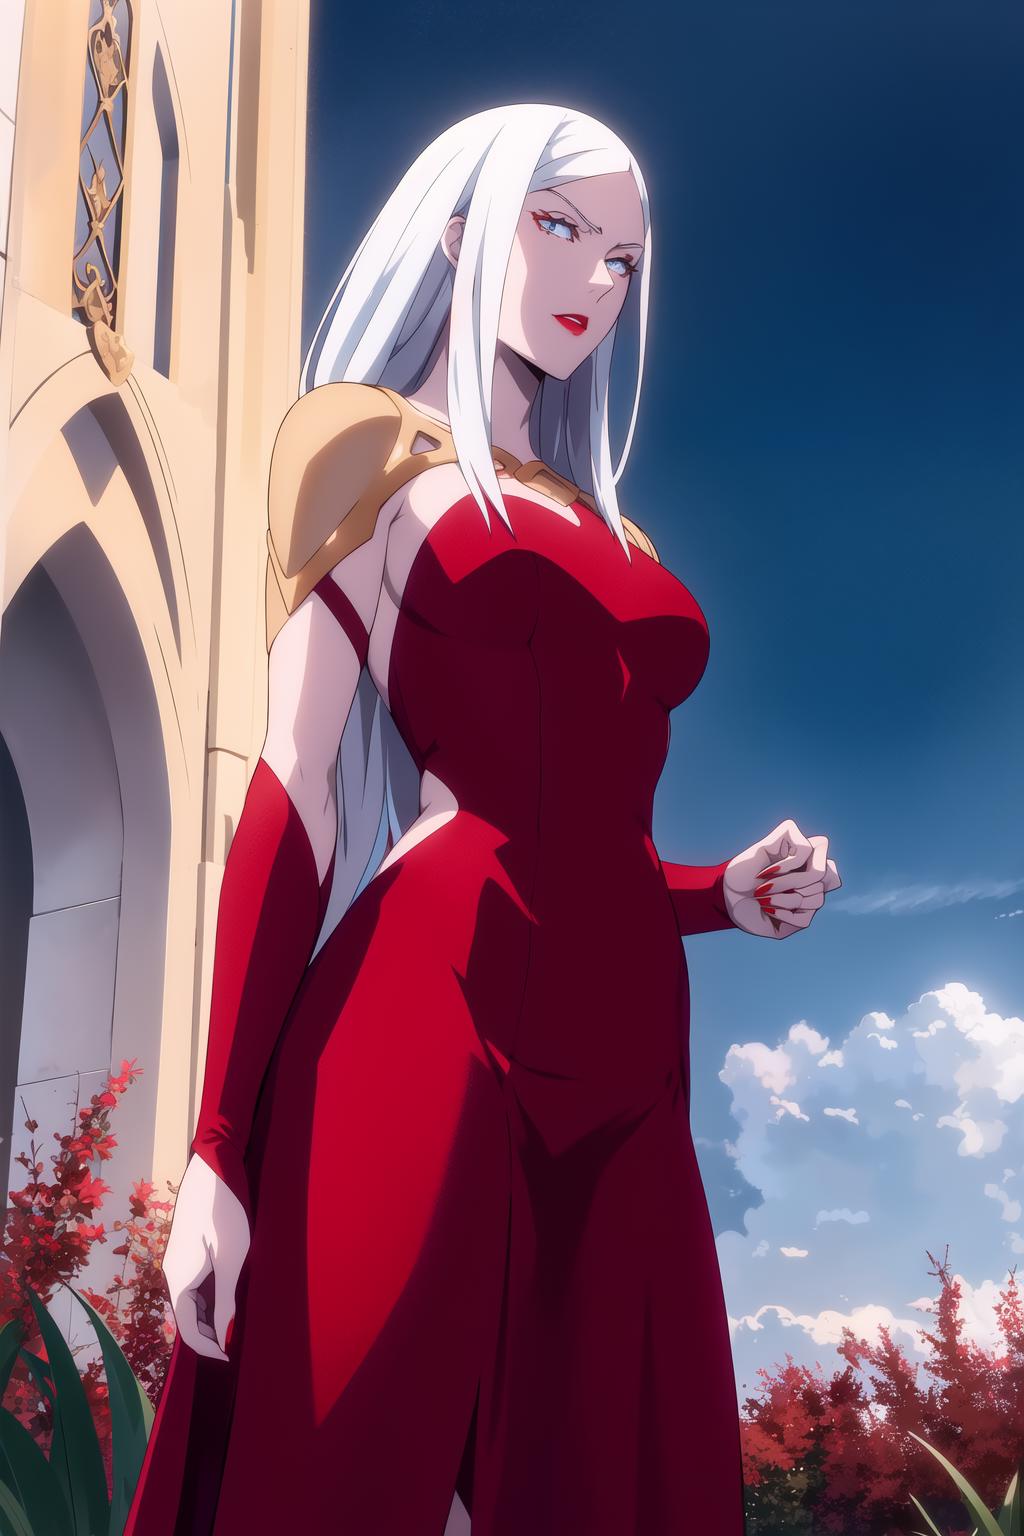 Carmilla from Castlevania is basically how I imagine Manon to look. Also I  was thinking this series would make an epic animated series :  r/throneofglassseries